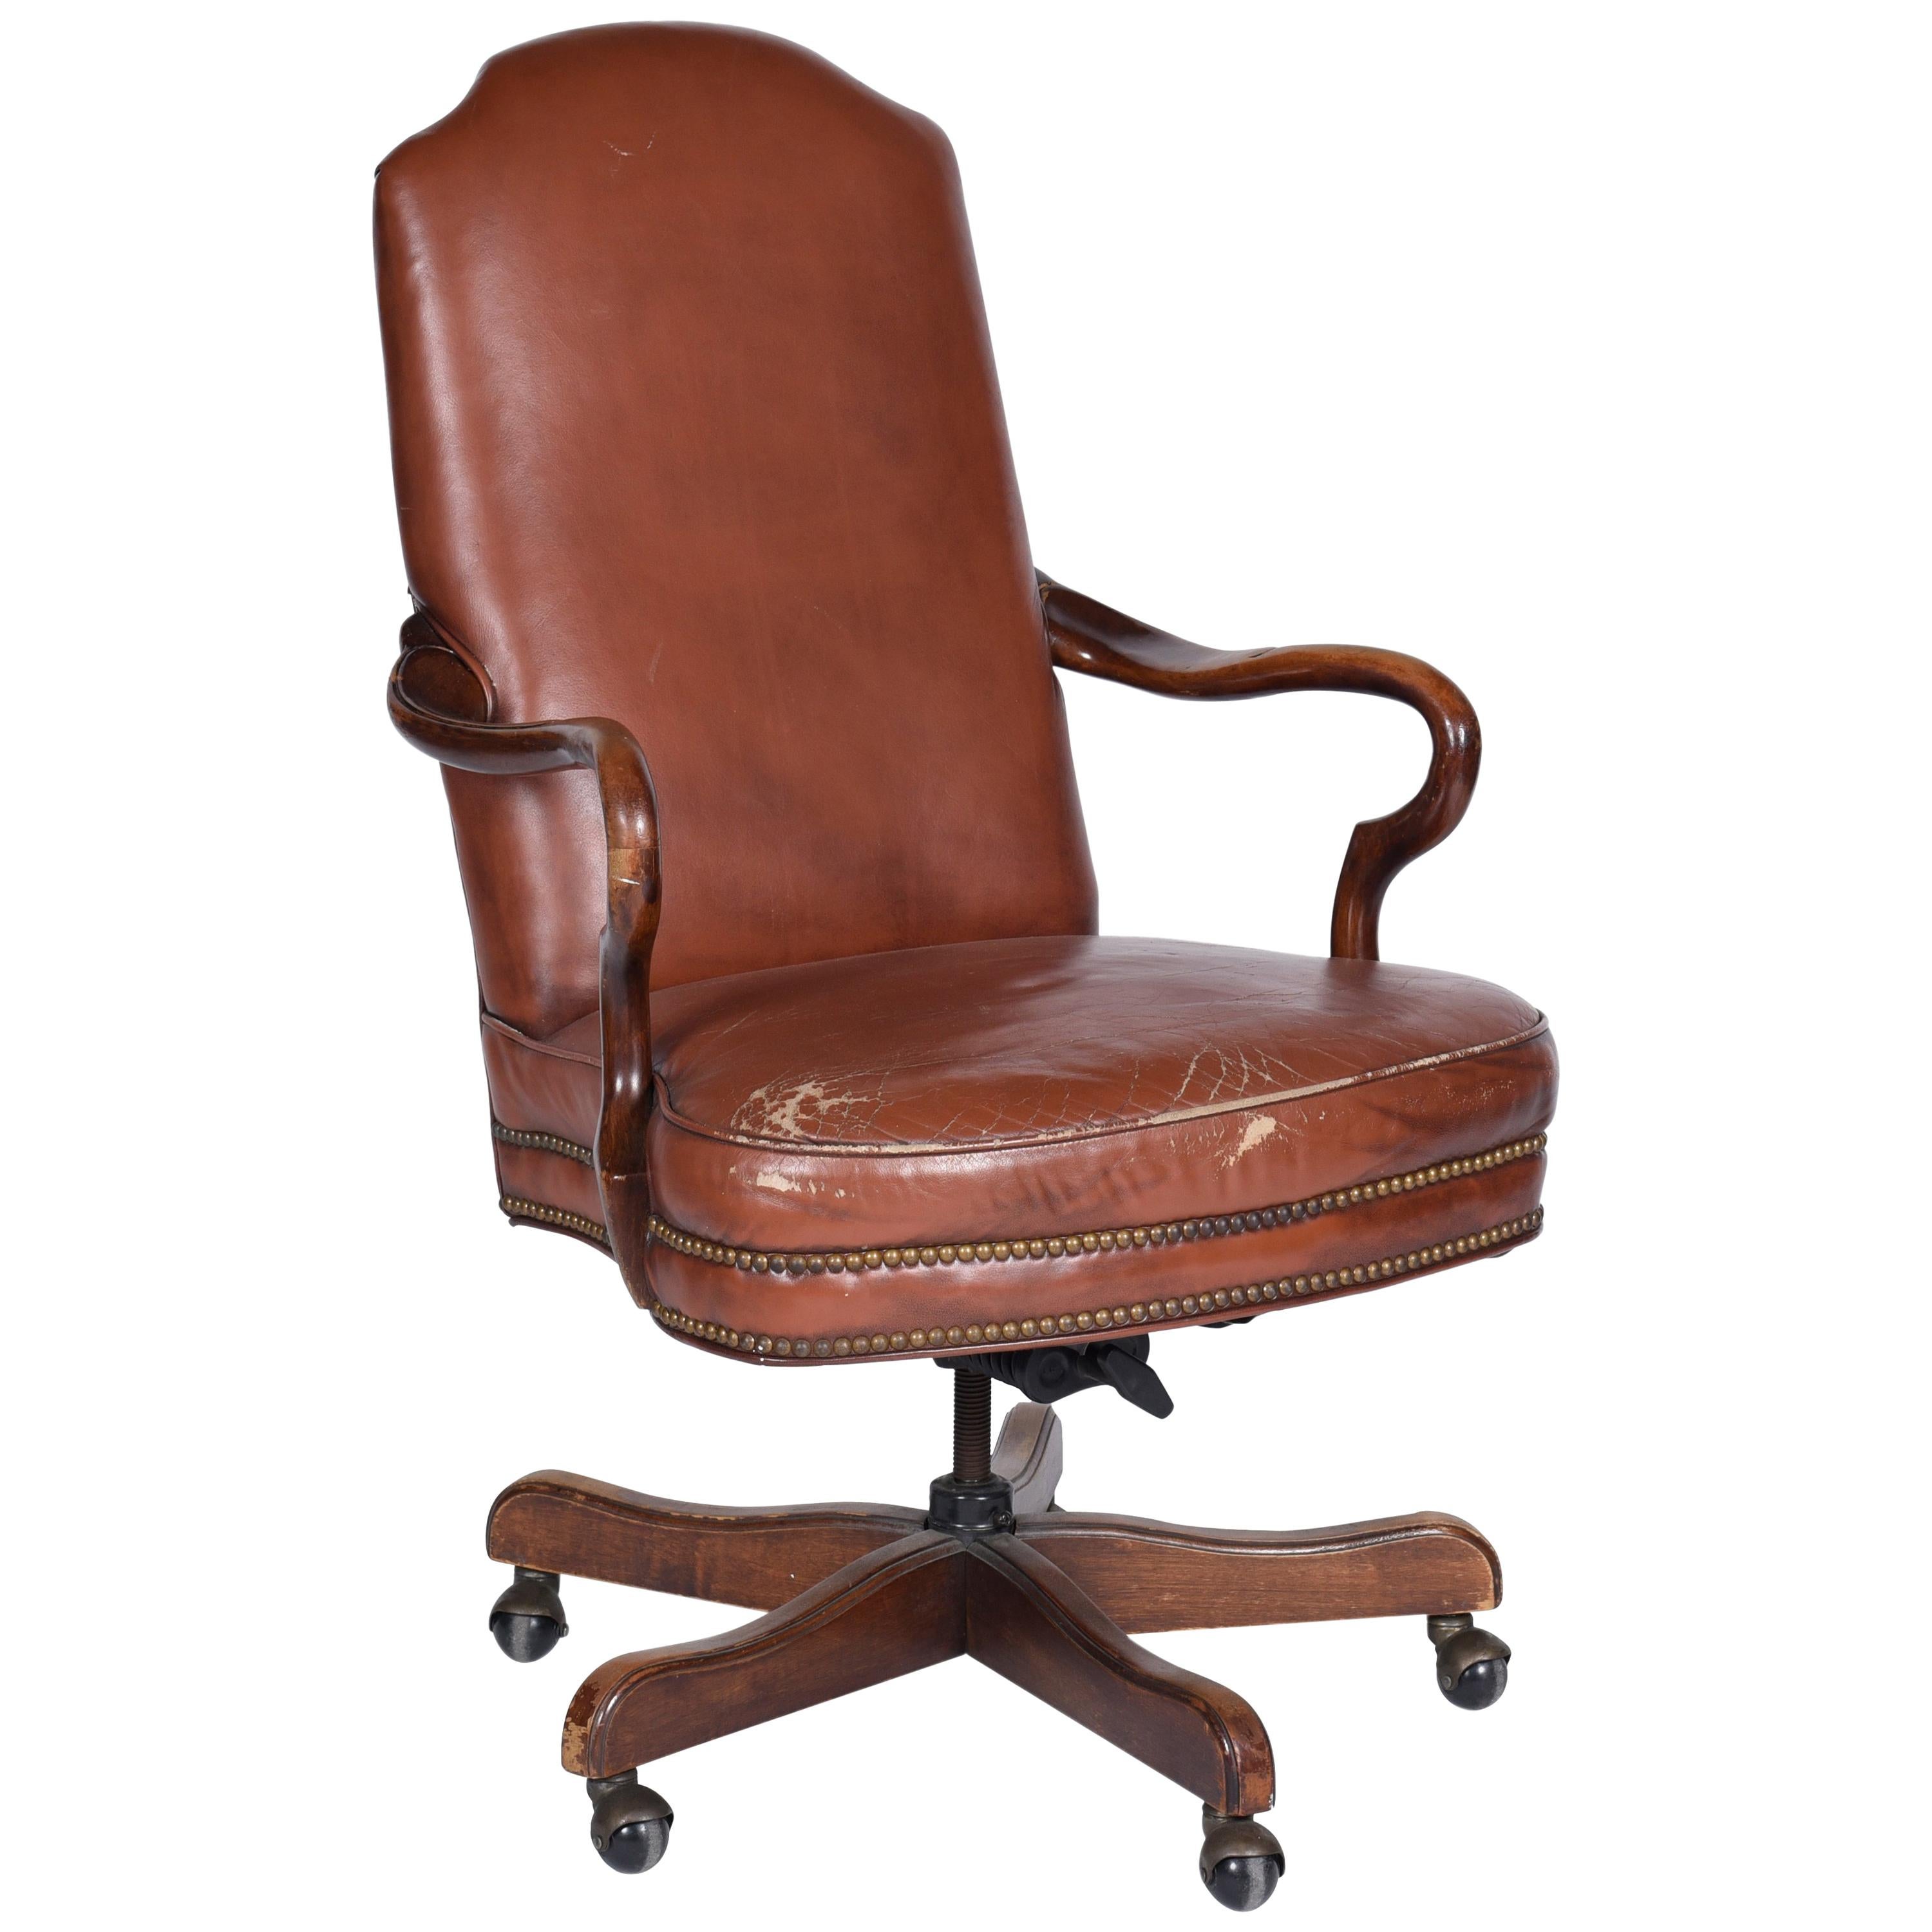 Neoclassical American Rotating Leather Office Chair by Woodmark